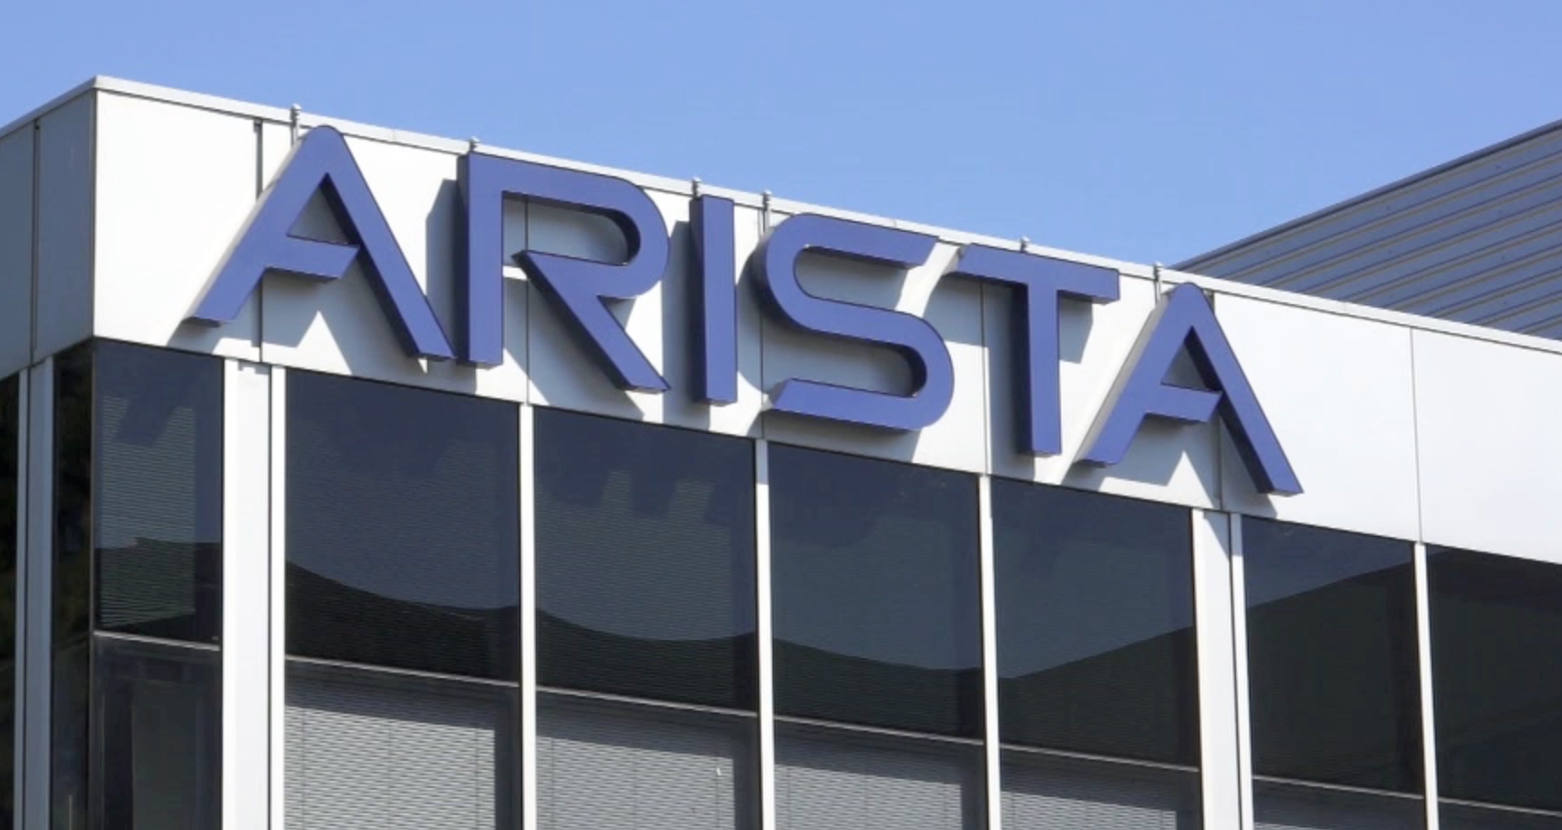 Arista's Exposure To A Few Giant Firms Could Be A Long-Term Achilles